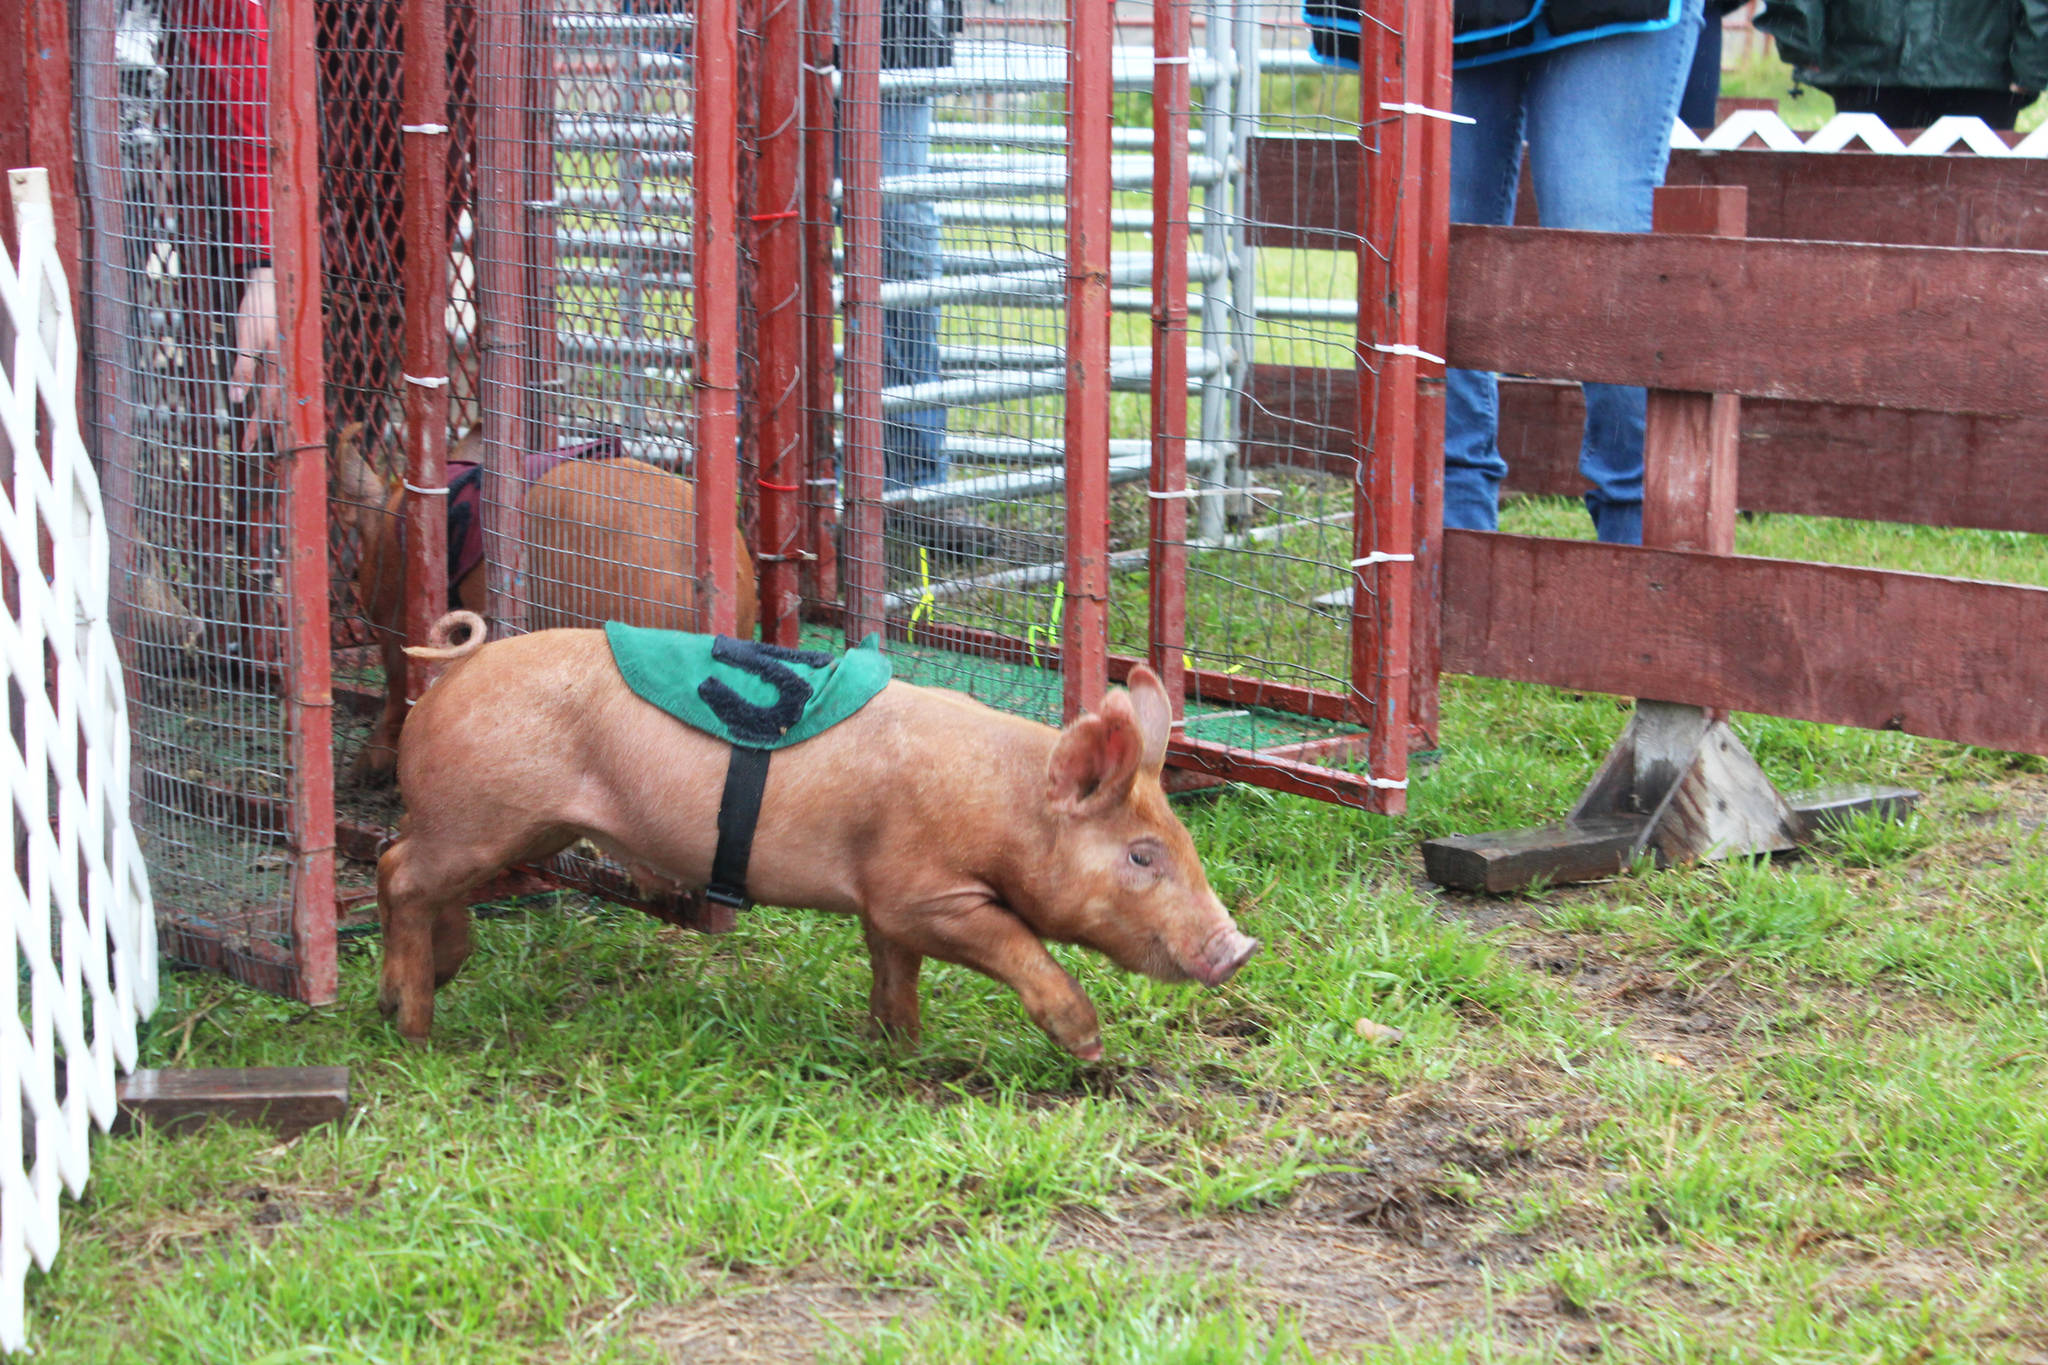 One of the pigs in Friday’s pig races, “Jake,” sponsored by State Farm, takes off from the gate on Friday, Aug. 18, 2017 at the Kenai Peninsula Fair in Ninilchik, Alaska. Members of the surrounding crowd placed bets on their favored pig, with all the money going to support the fair. (Photo by Megan Pacer/Homer News)